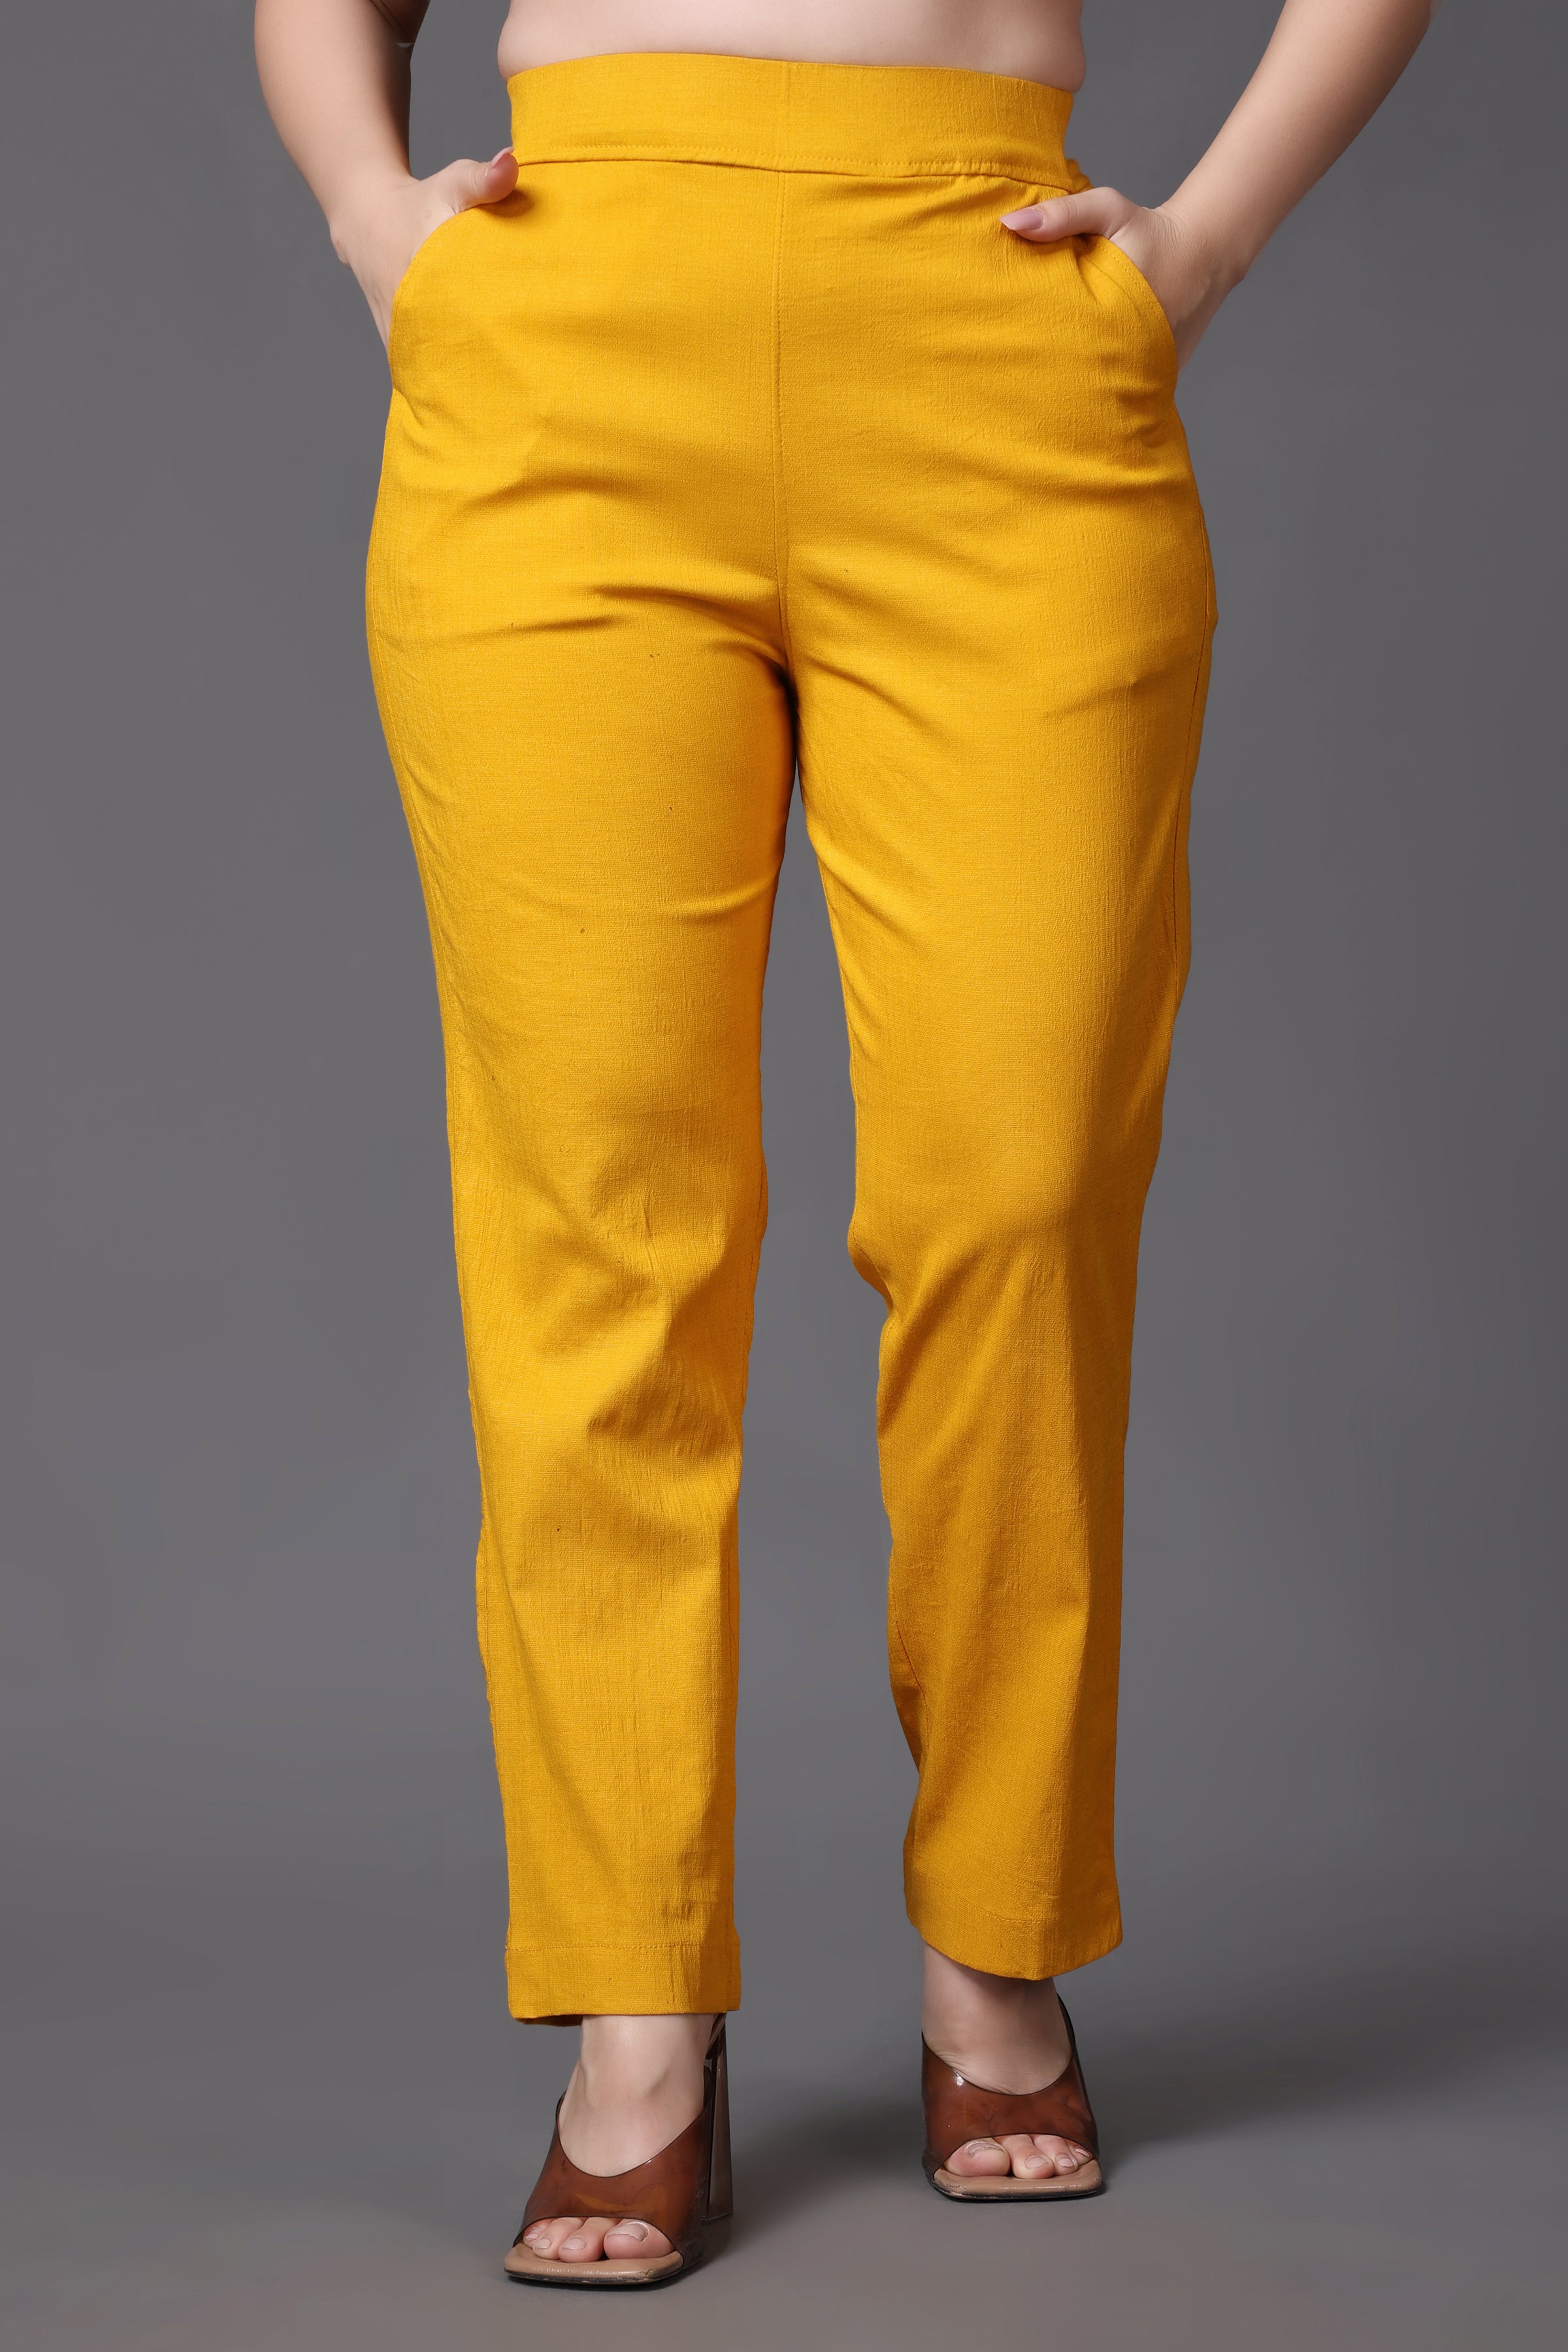 Buy Mustard Yellow Trousers & Pants for Women by Outryt Online | Ajio.com